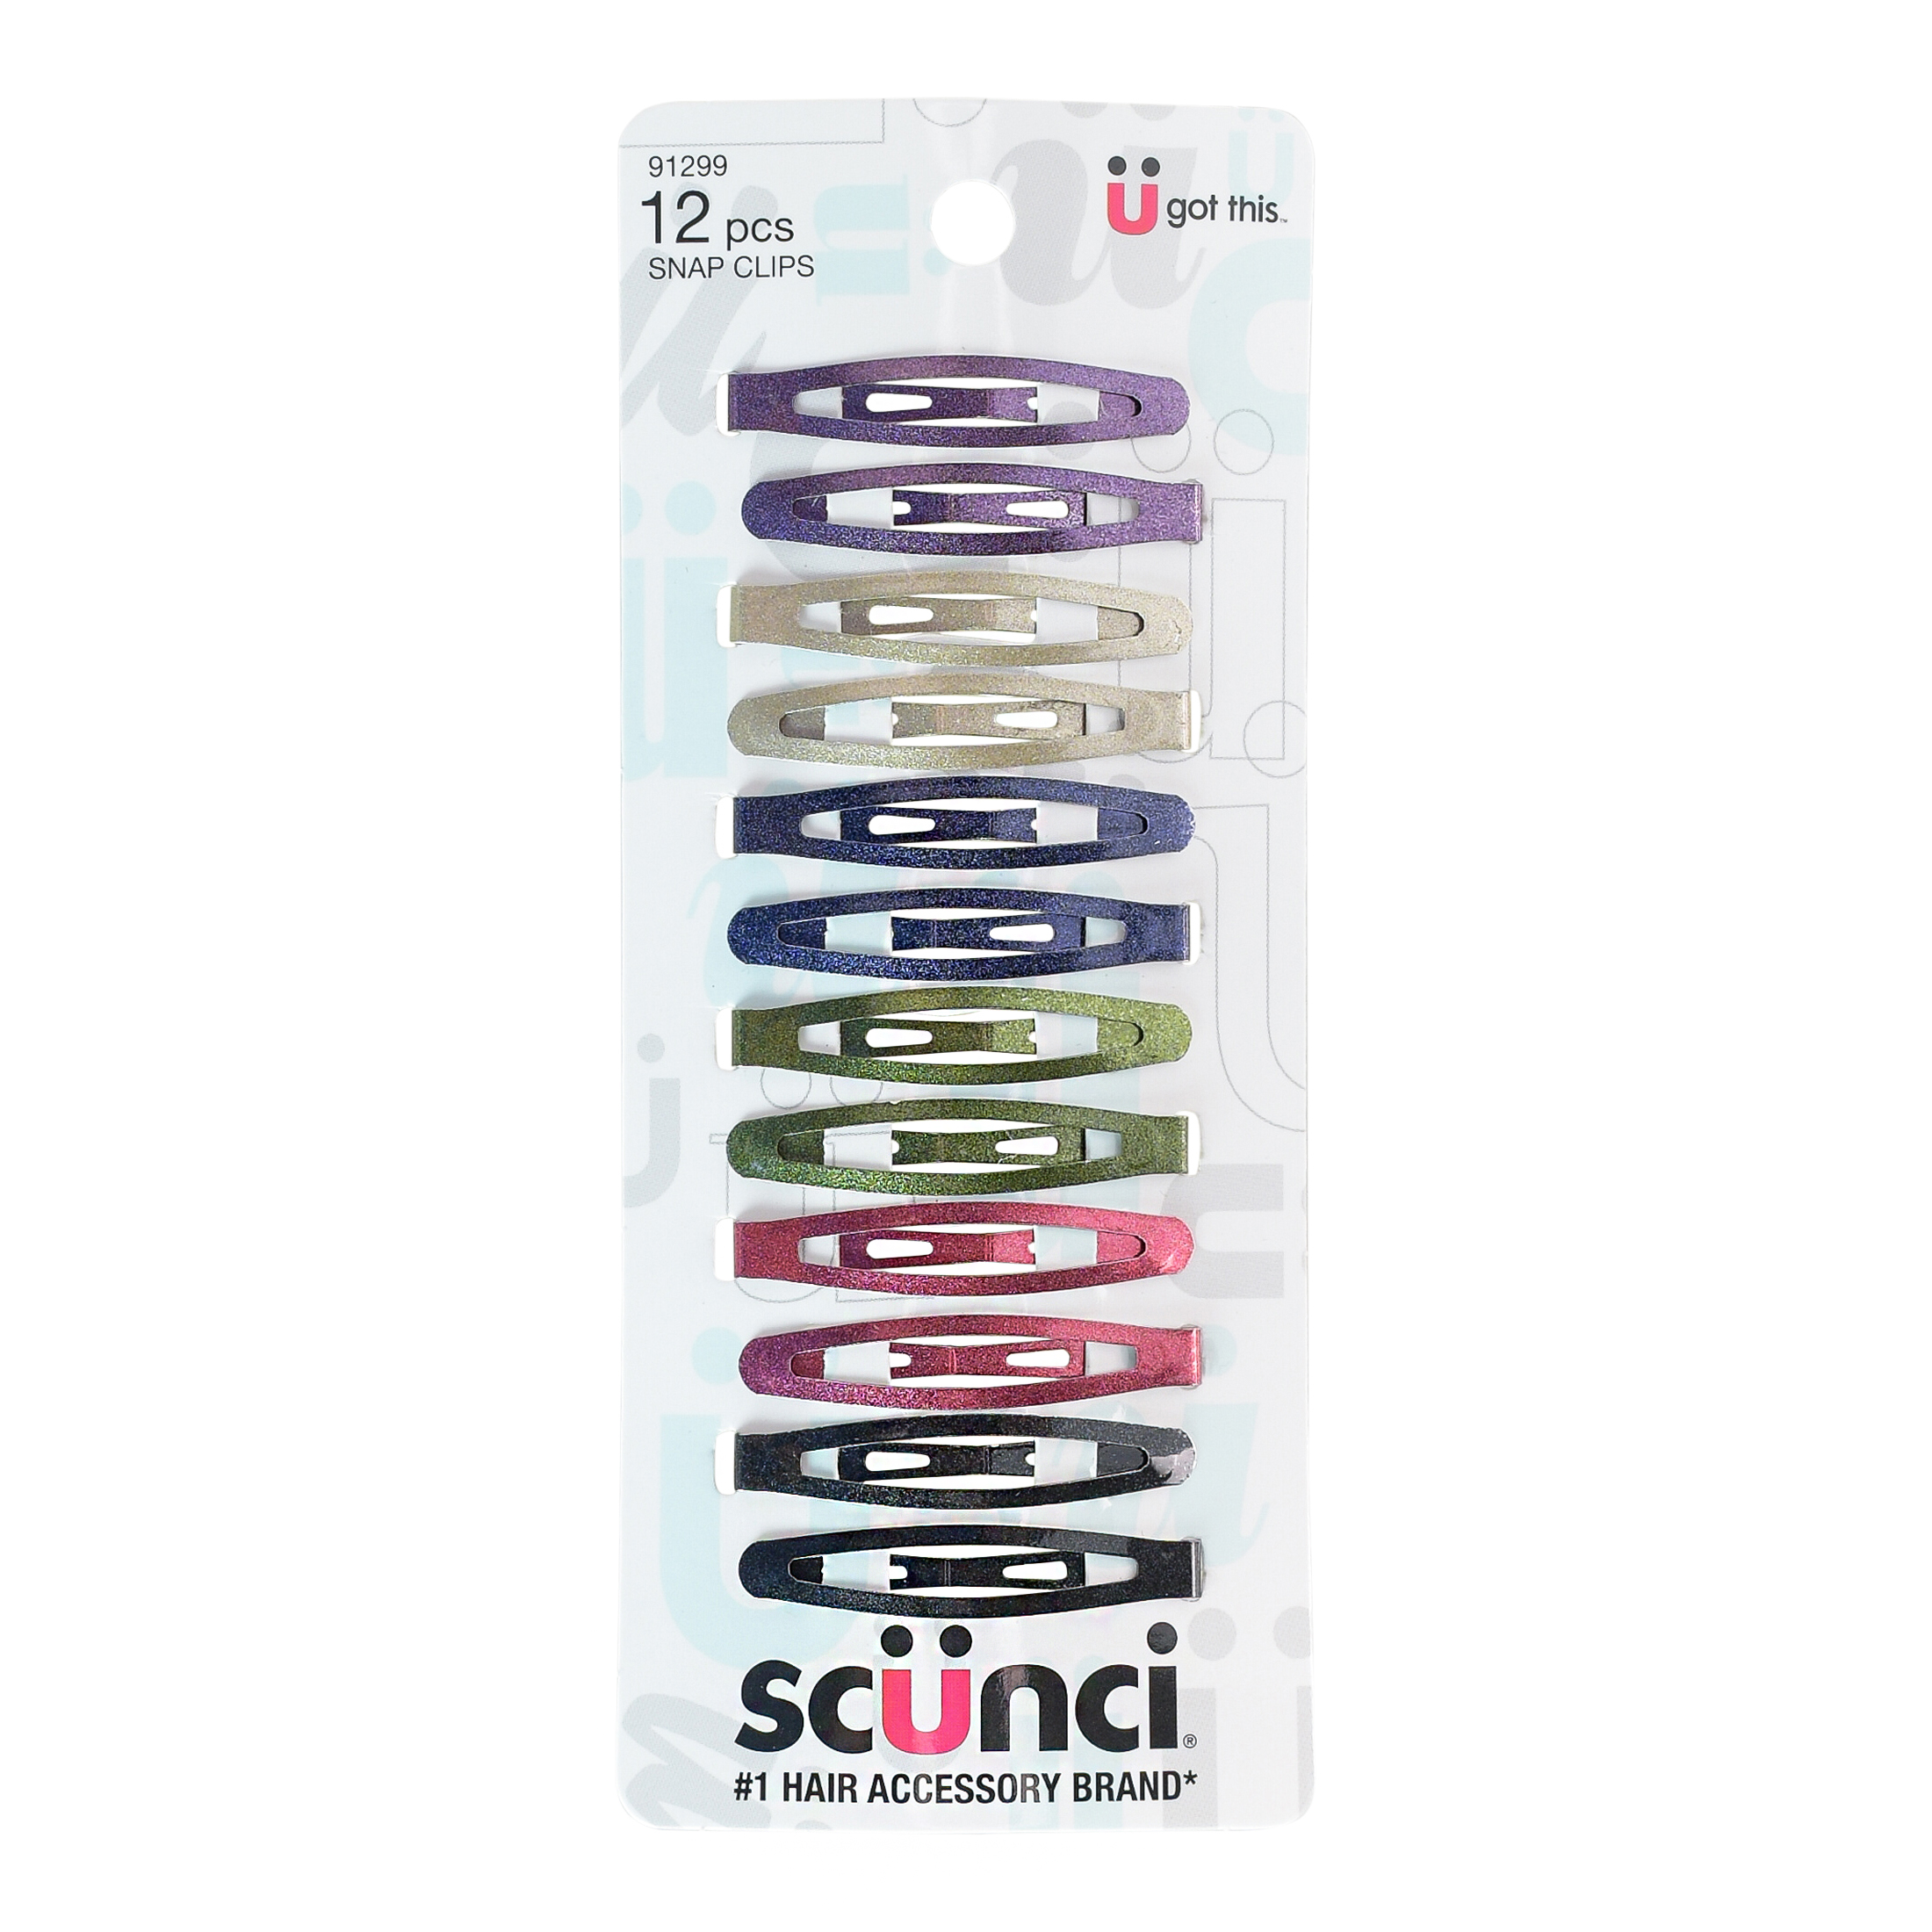 Scunci Metal Open-Center Snap Clip Barrettes, All Day Hold, in Multi-Color Jewel Tones, 12ct - image 3 of 8